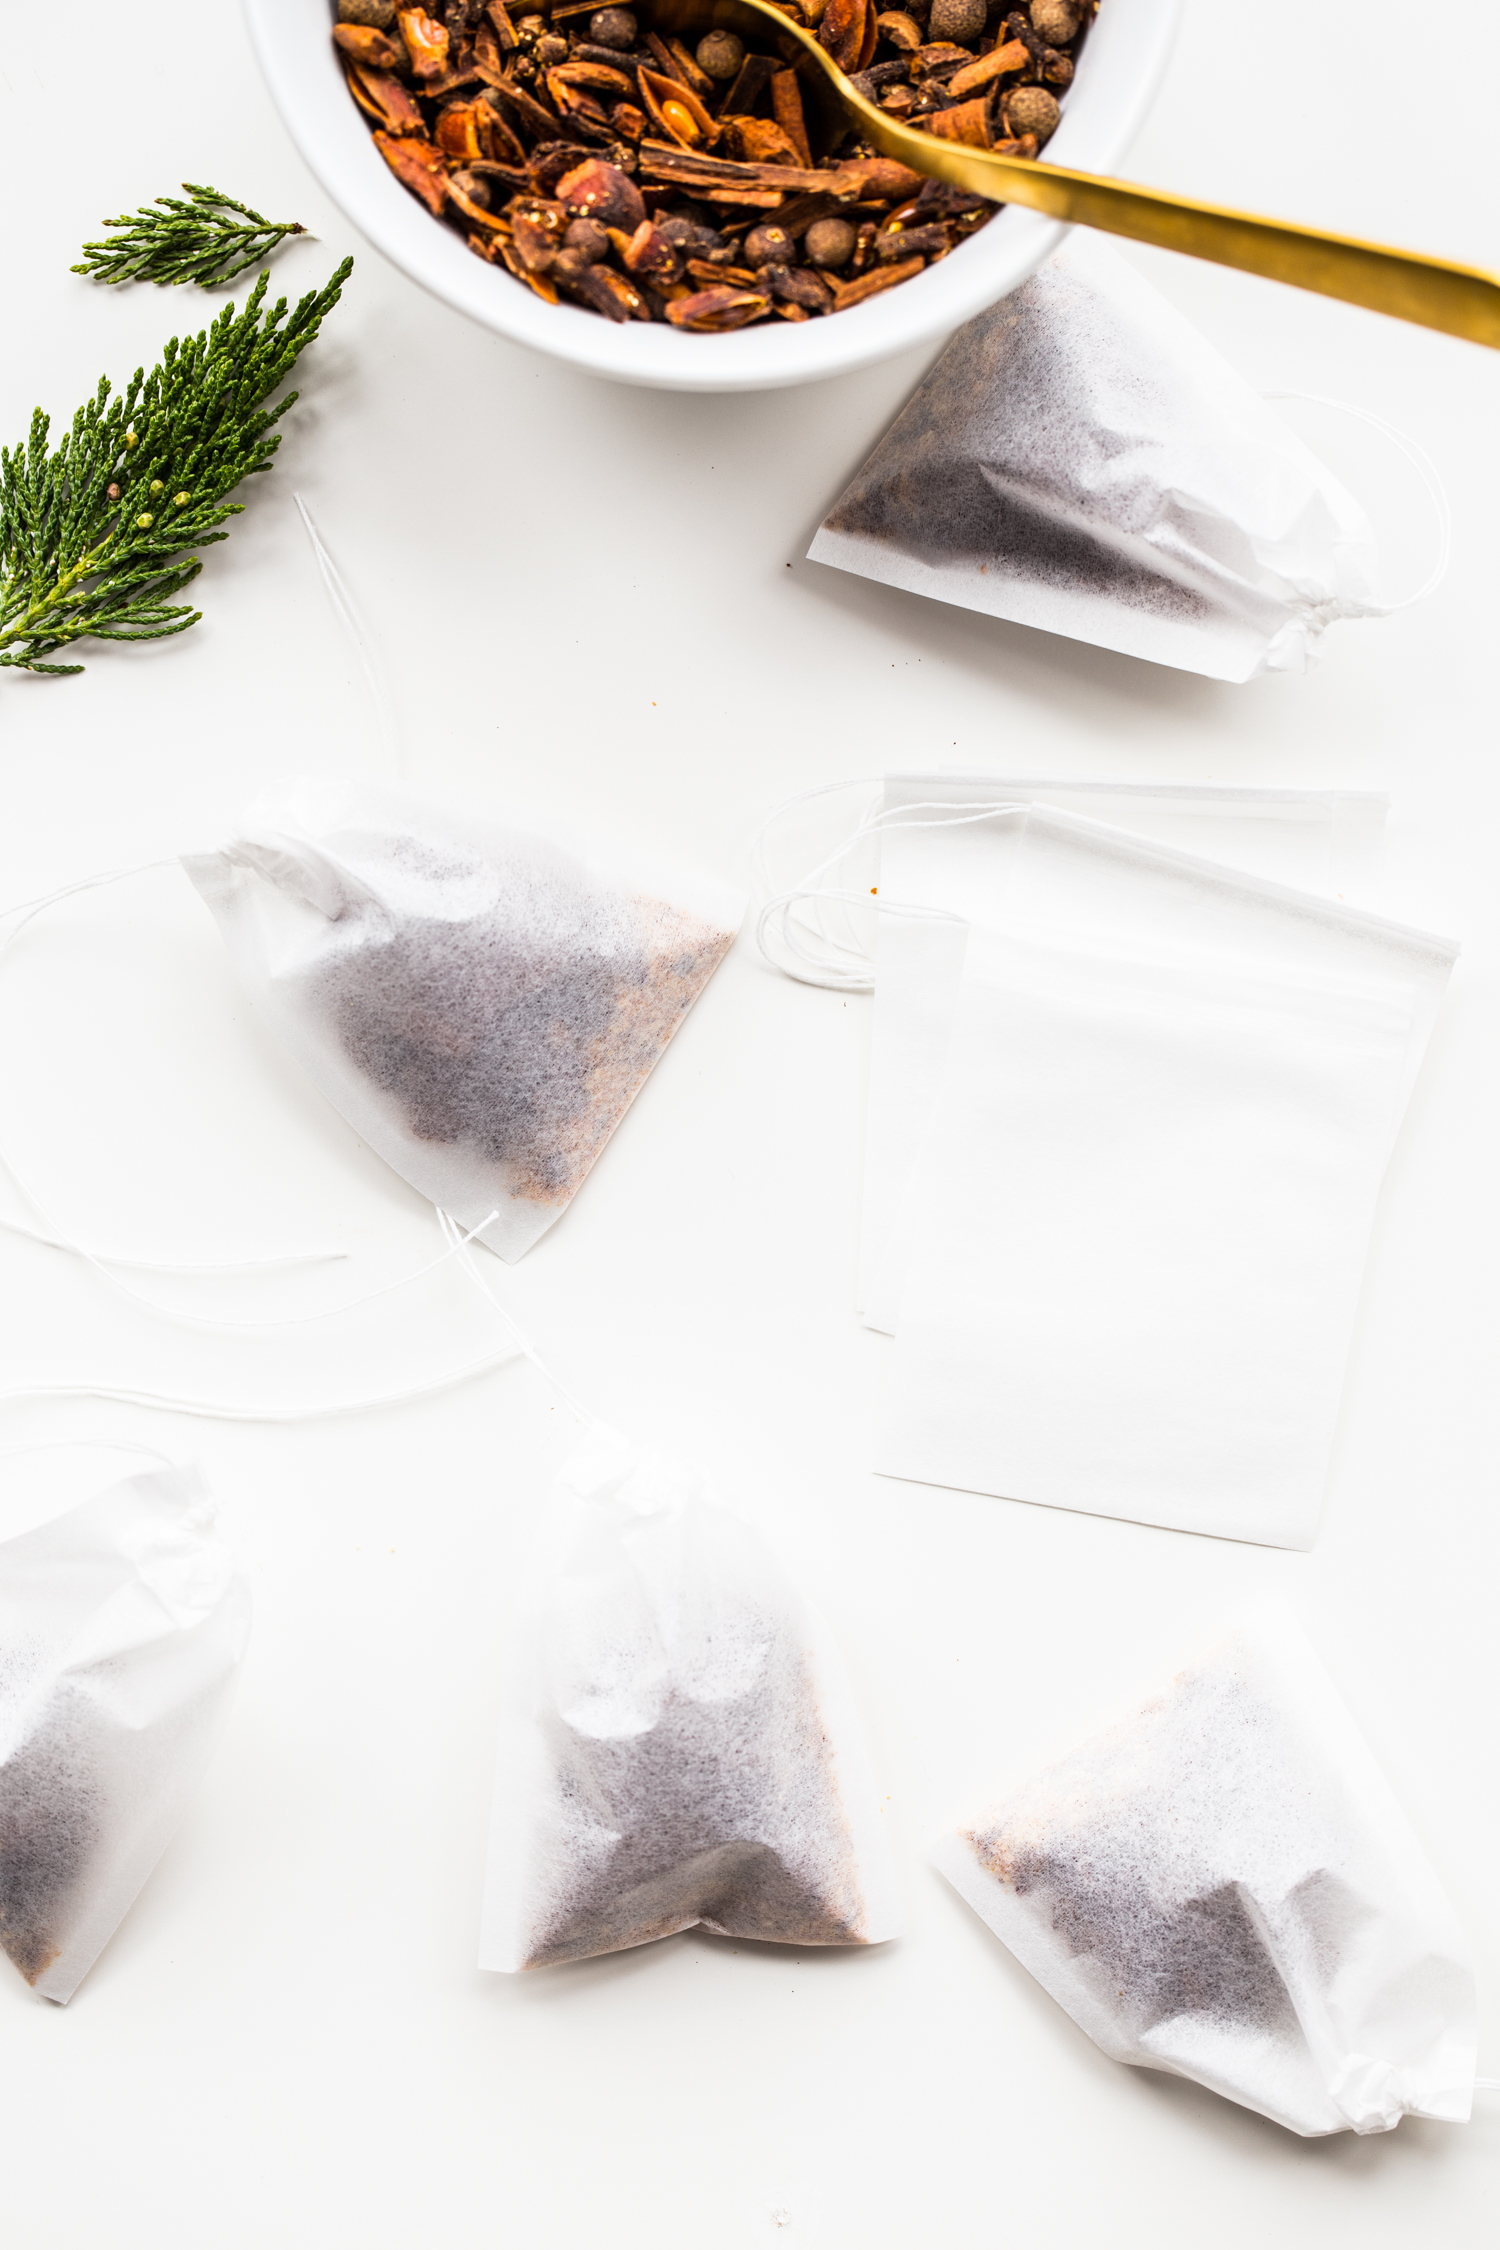 DIY Holiday Mulling Spices in individual sachet bags